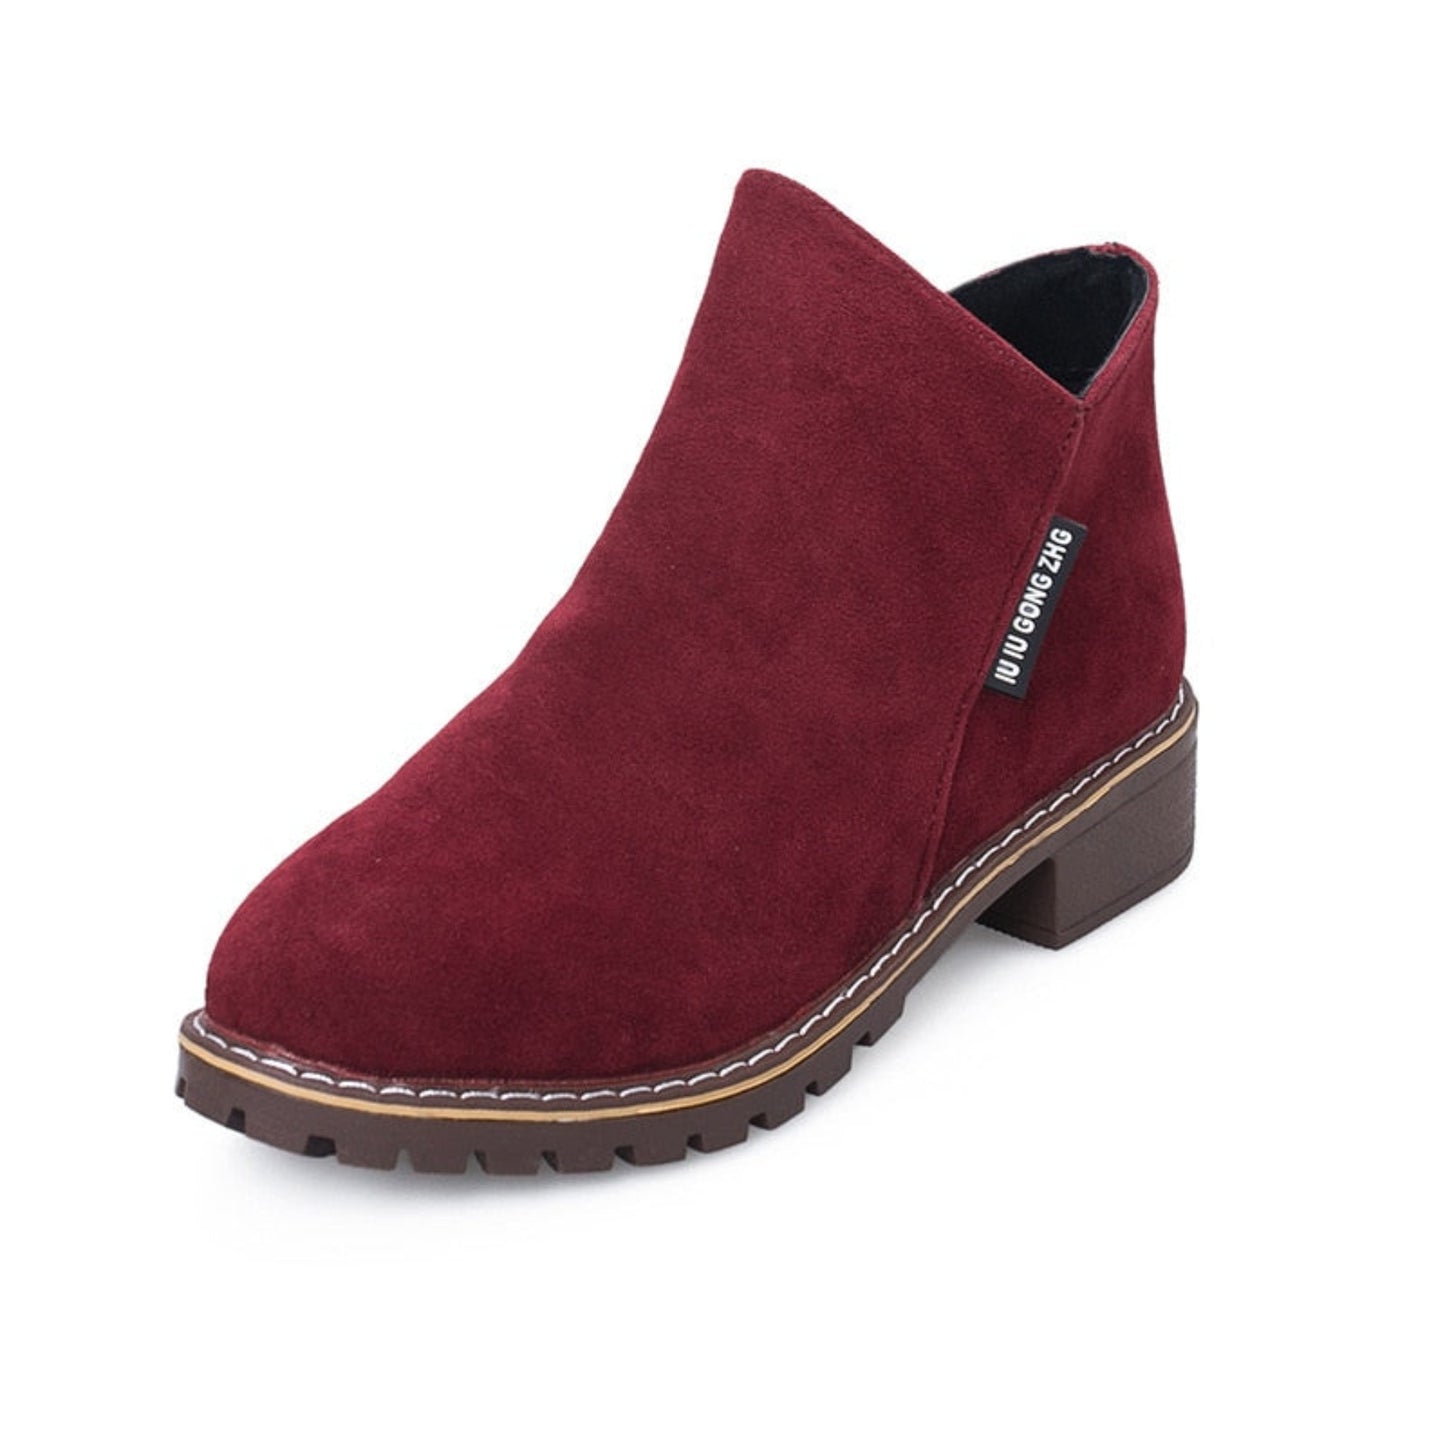 Autumn Winter Suede Ankle Boots